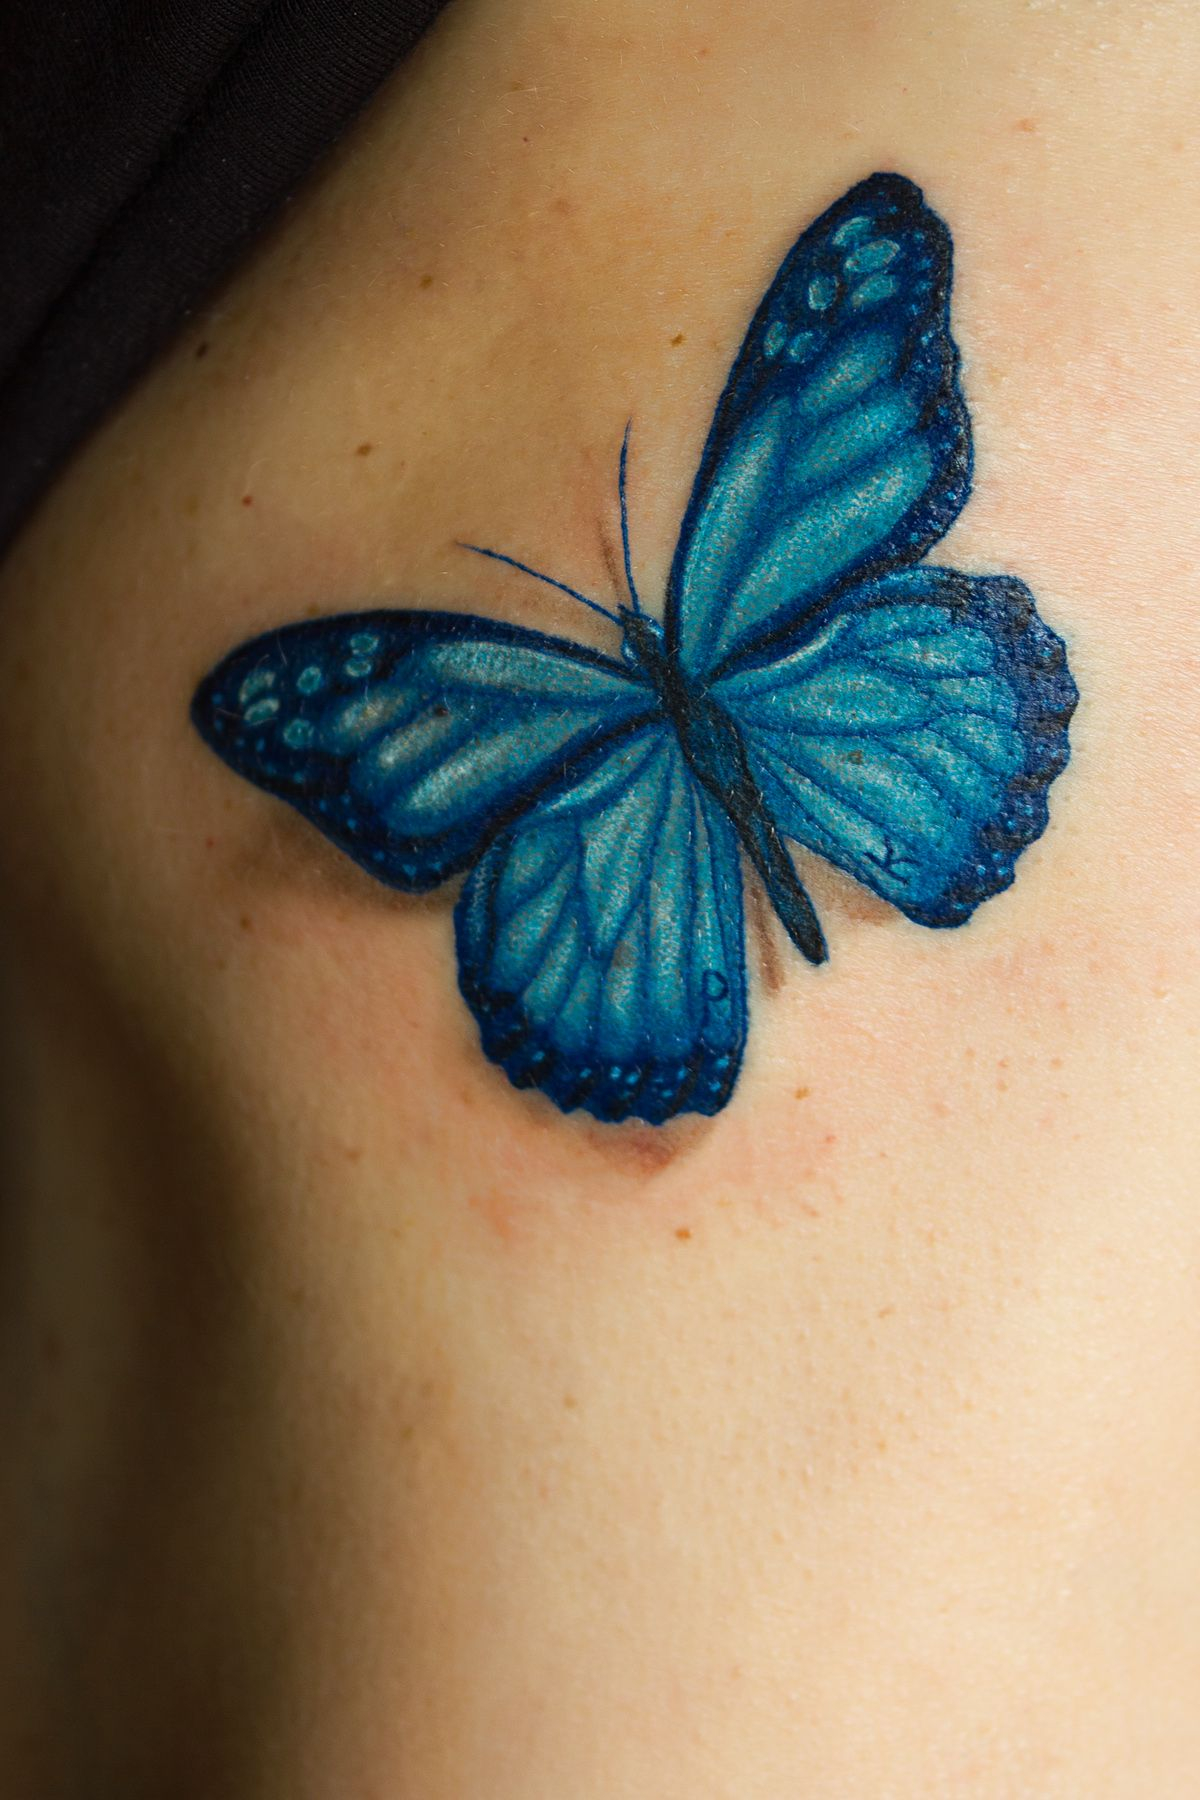 Inspirational Tattoos Unbelievable 3d Butterfly Tattoos Tattoos pertaining to dimensions 1200 X 1800